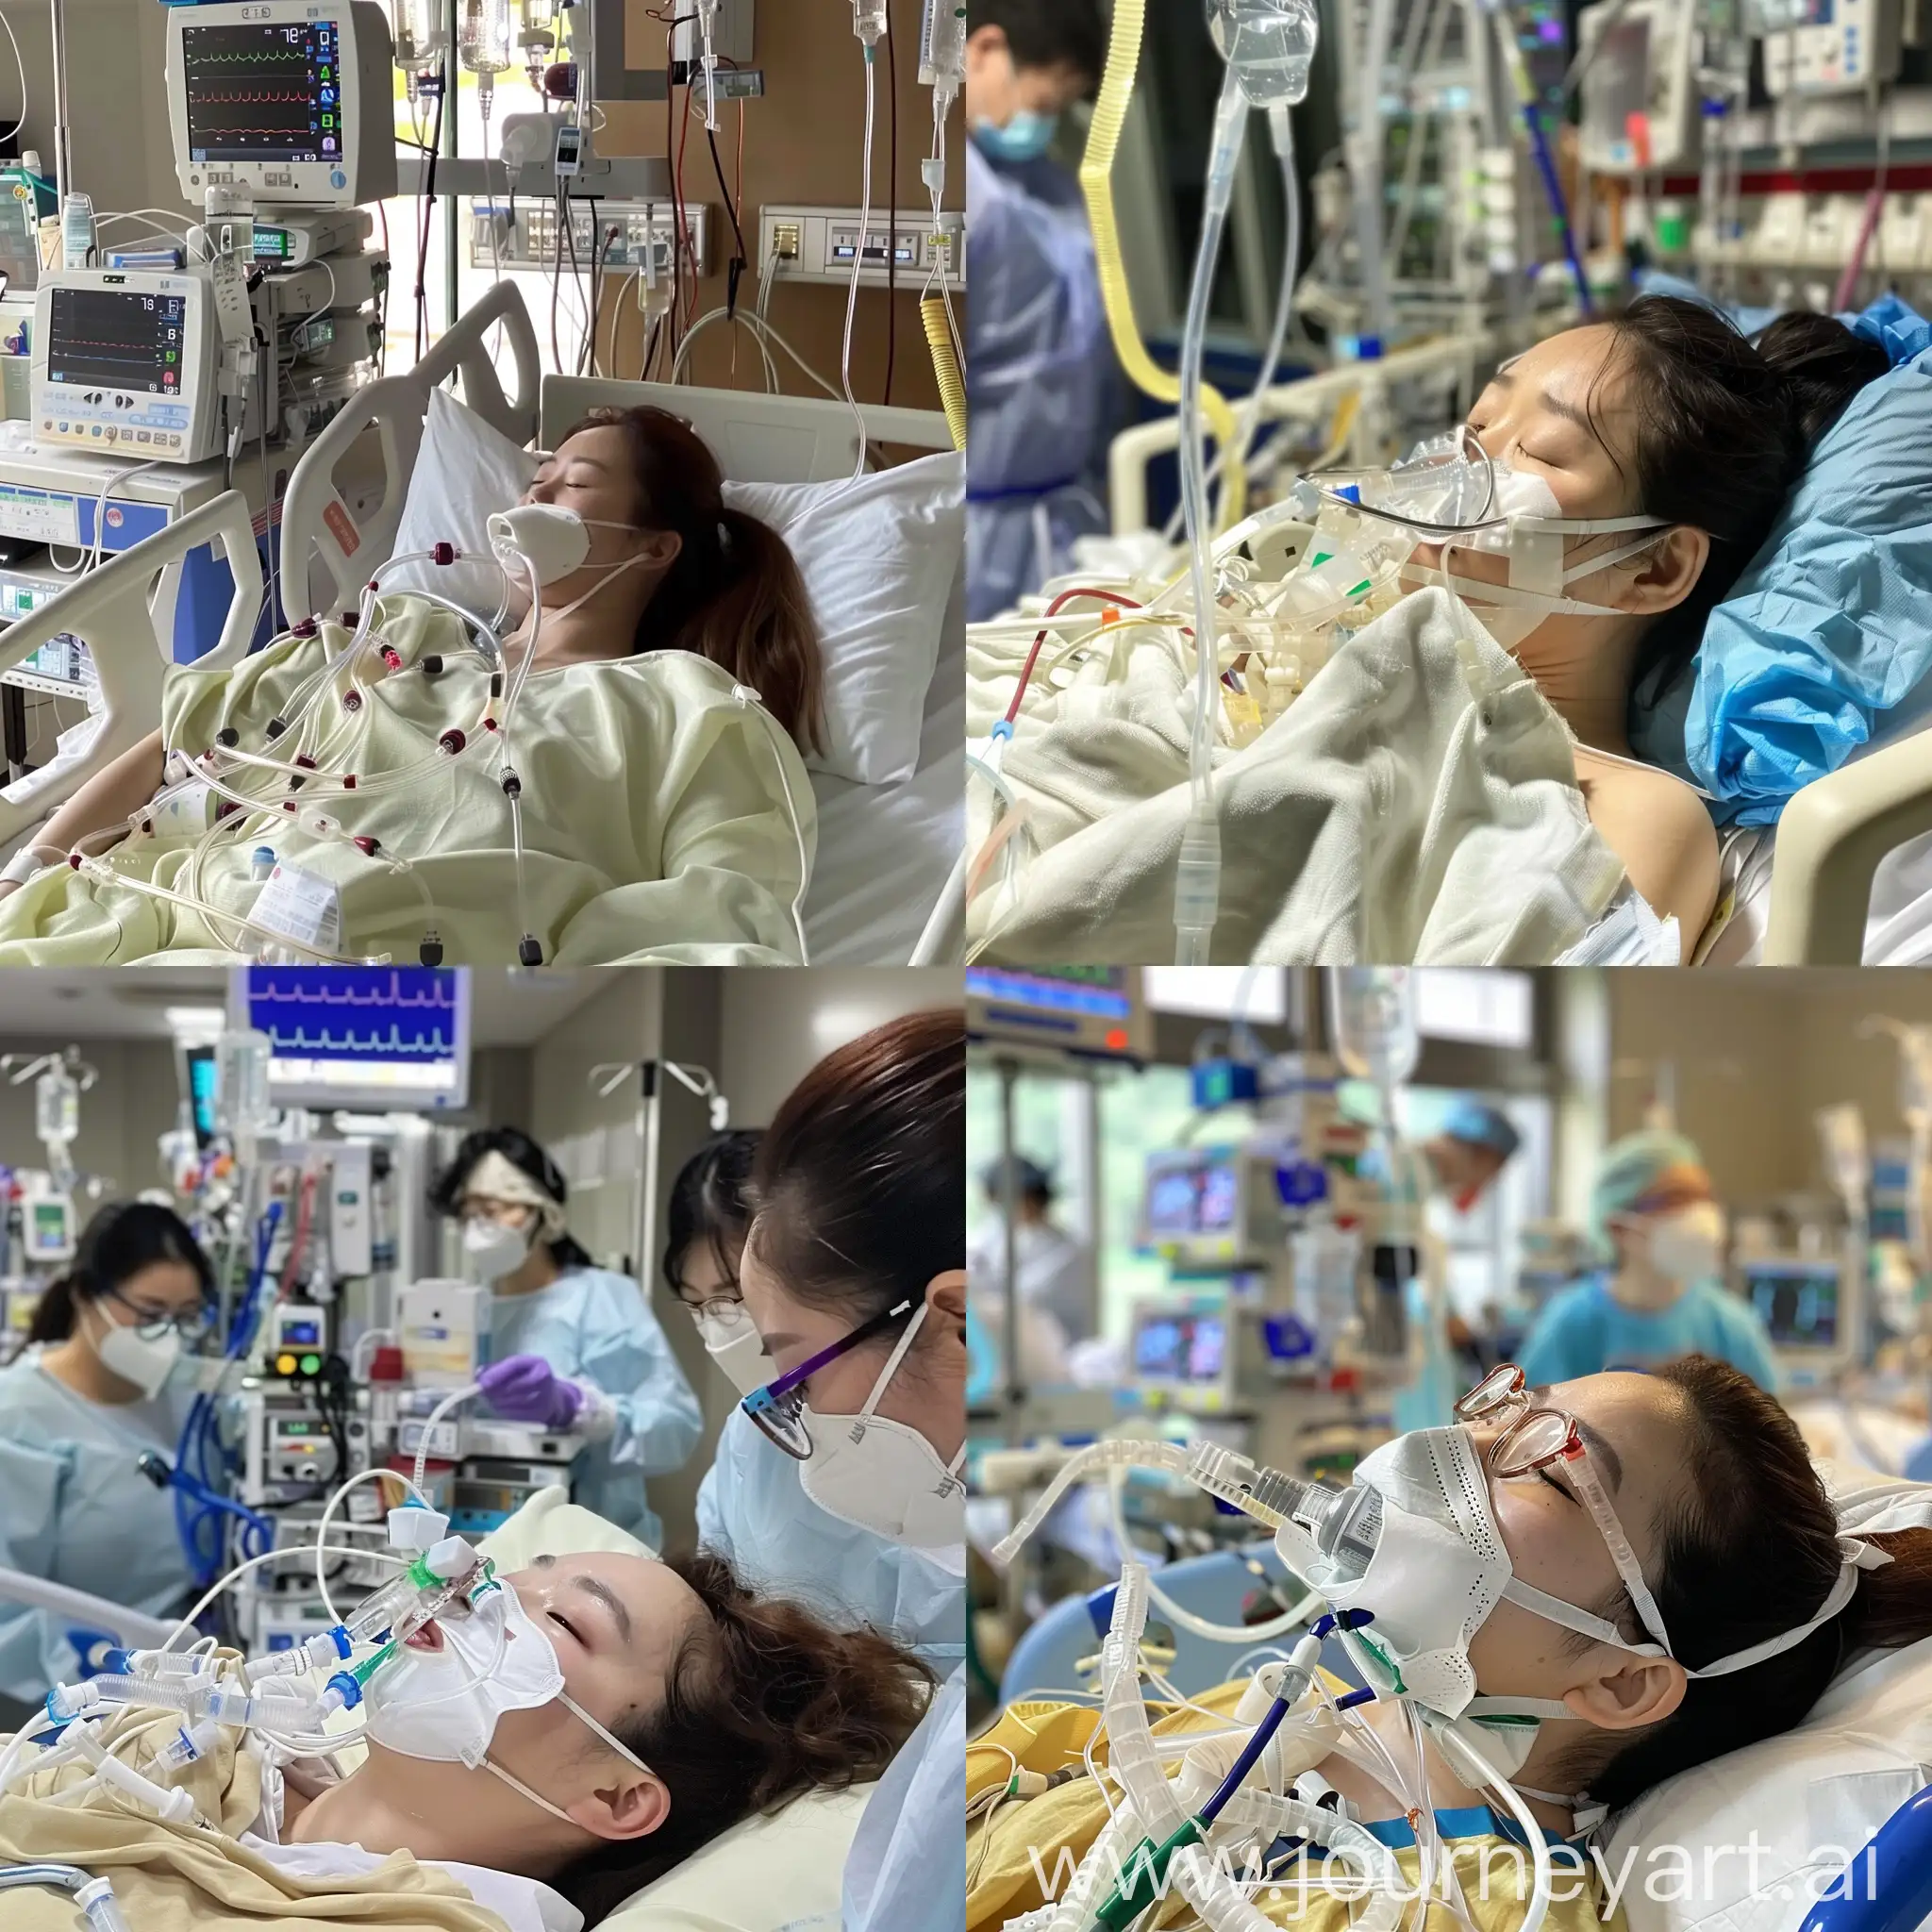 korean woman intubated in ICU, receiving CPR, critical condition